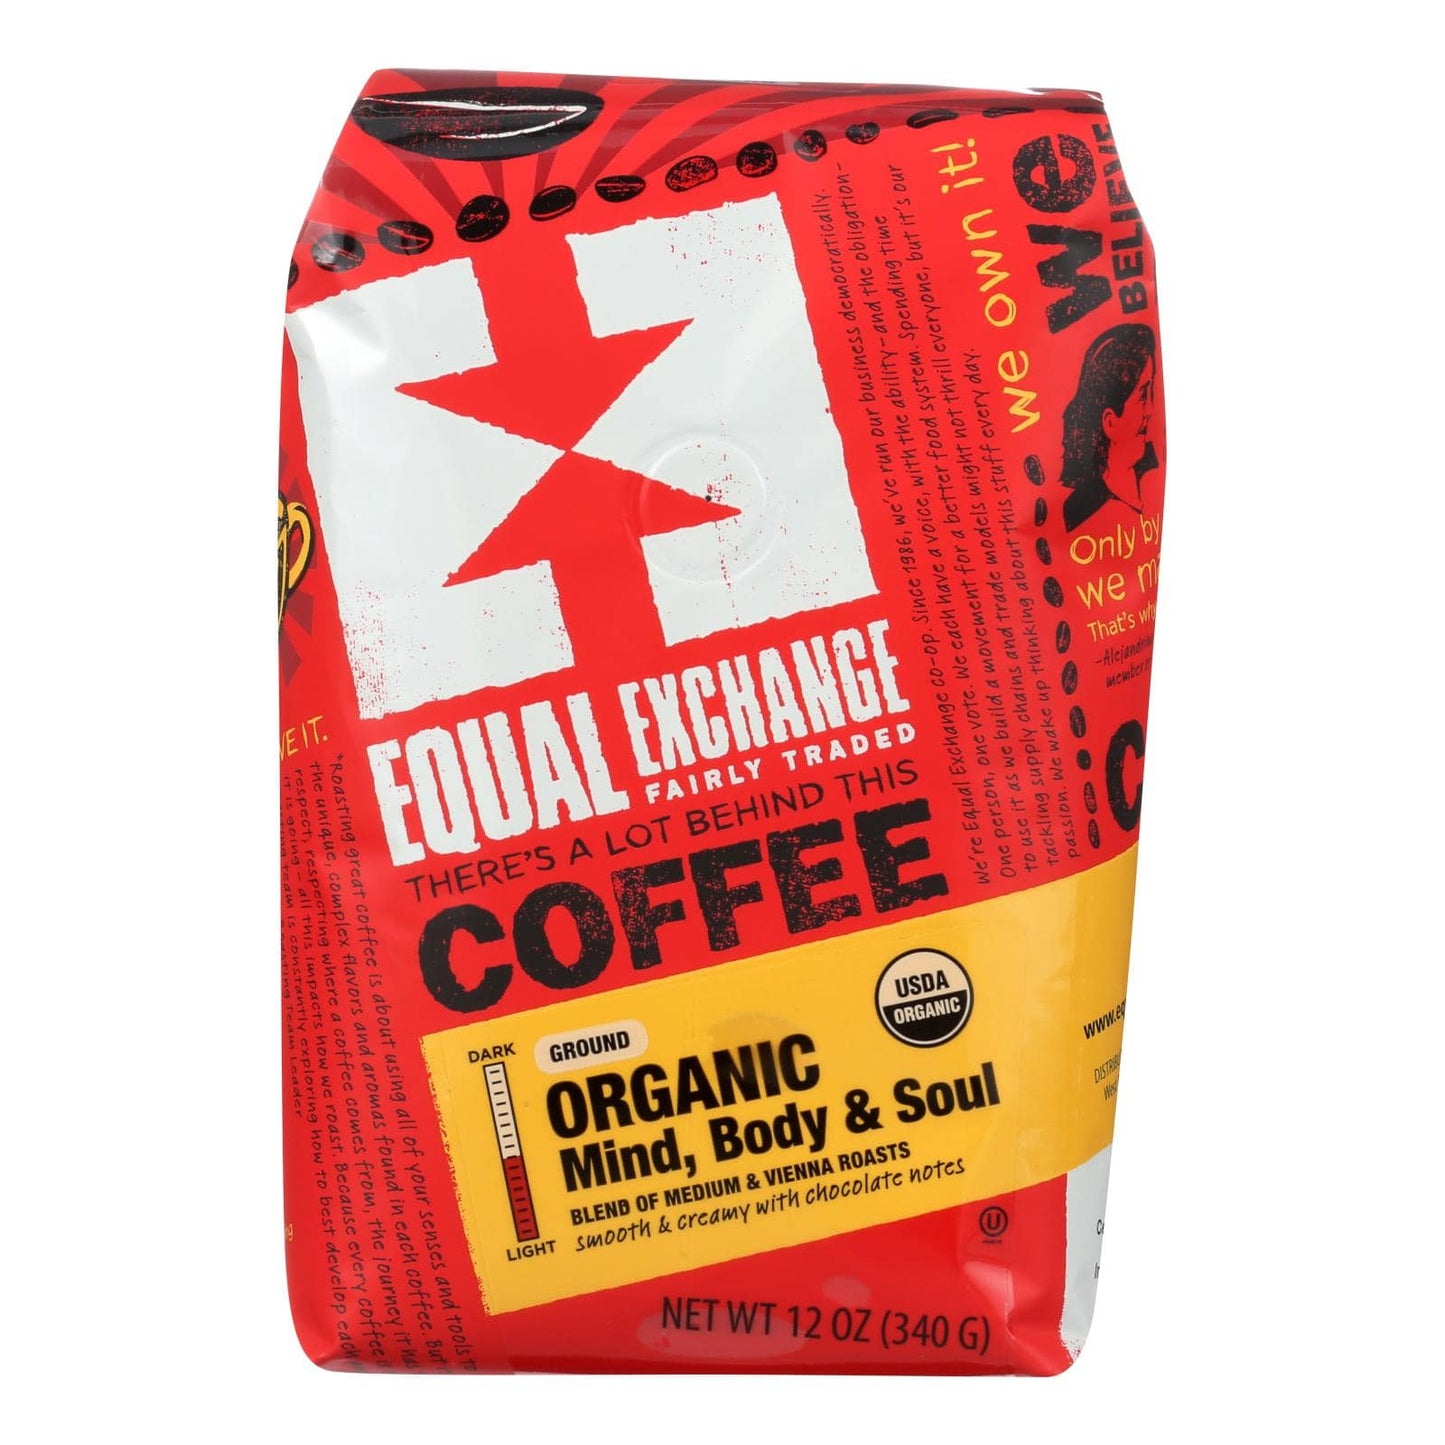 Buy Equal Exchange Organic Drip Coffee - Mind Body And Soul - Case Of 6 - 12 Oz.  at OnlyNaturals.us